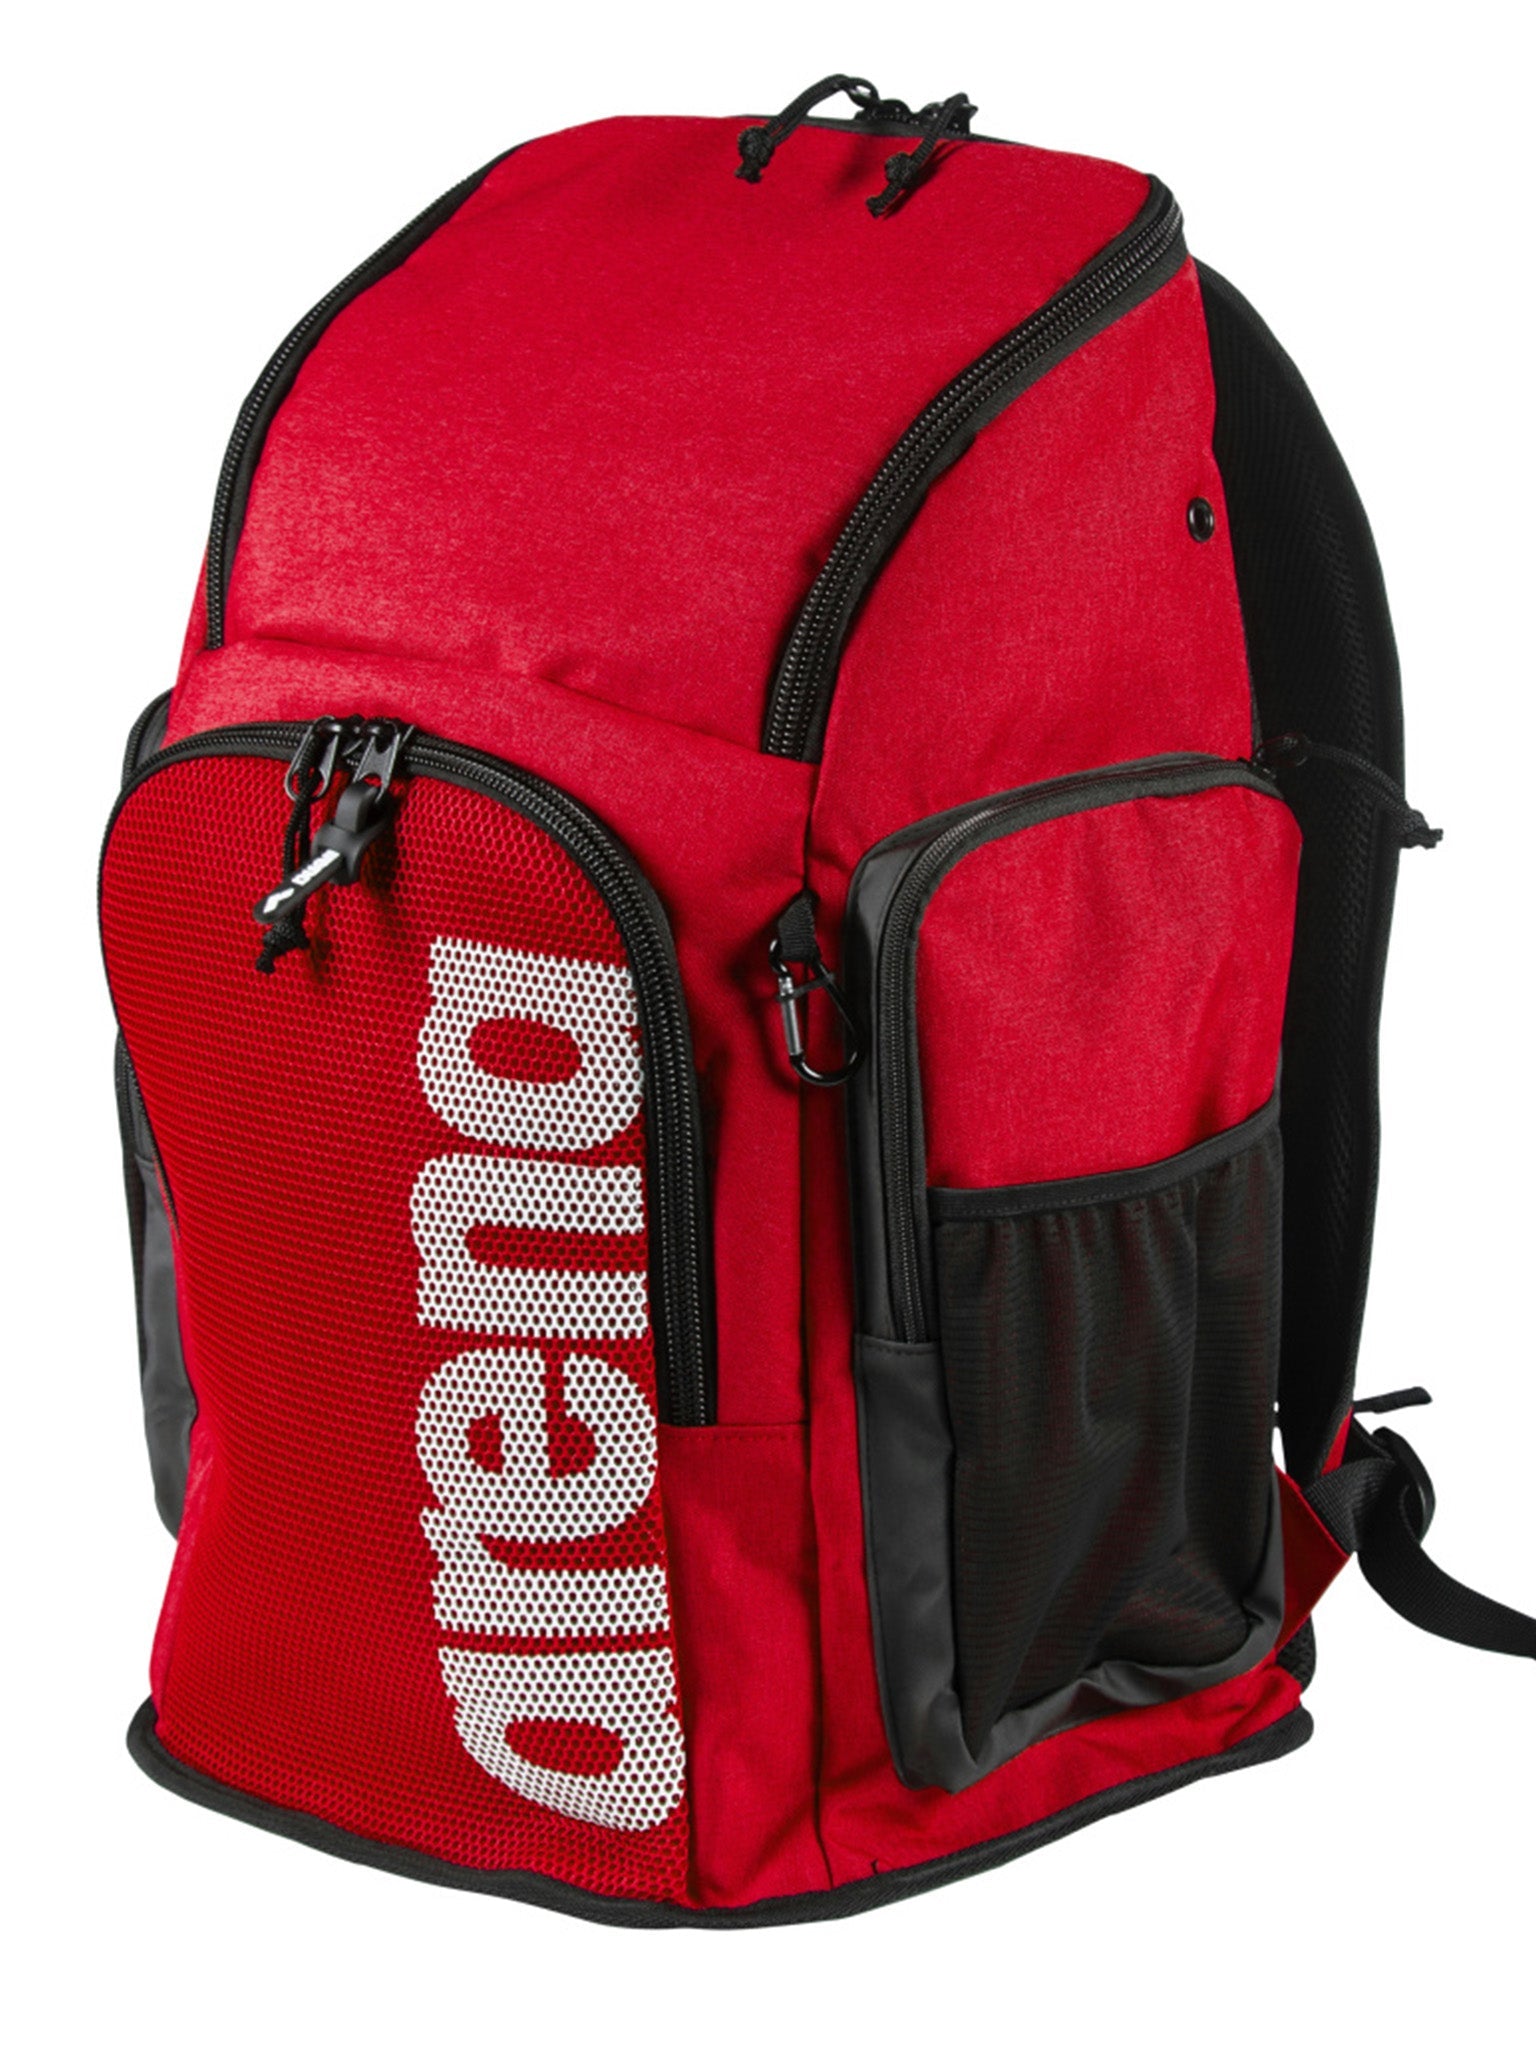 Team 45 Backpack - Red